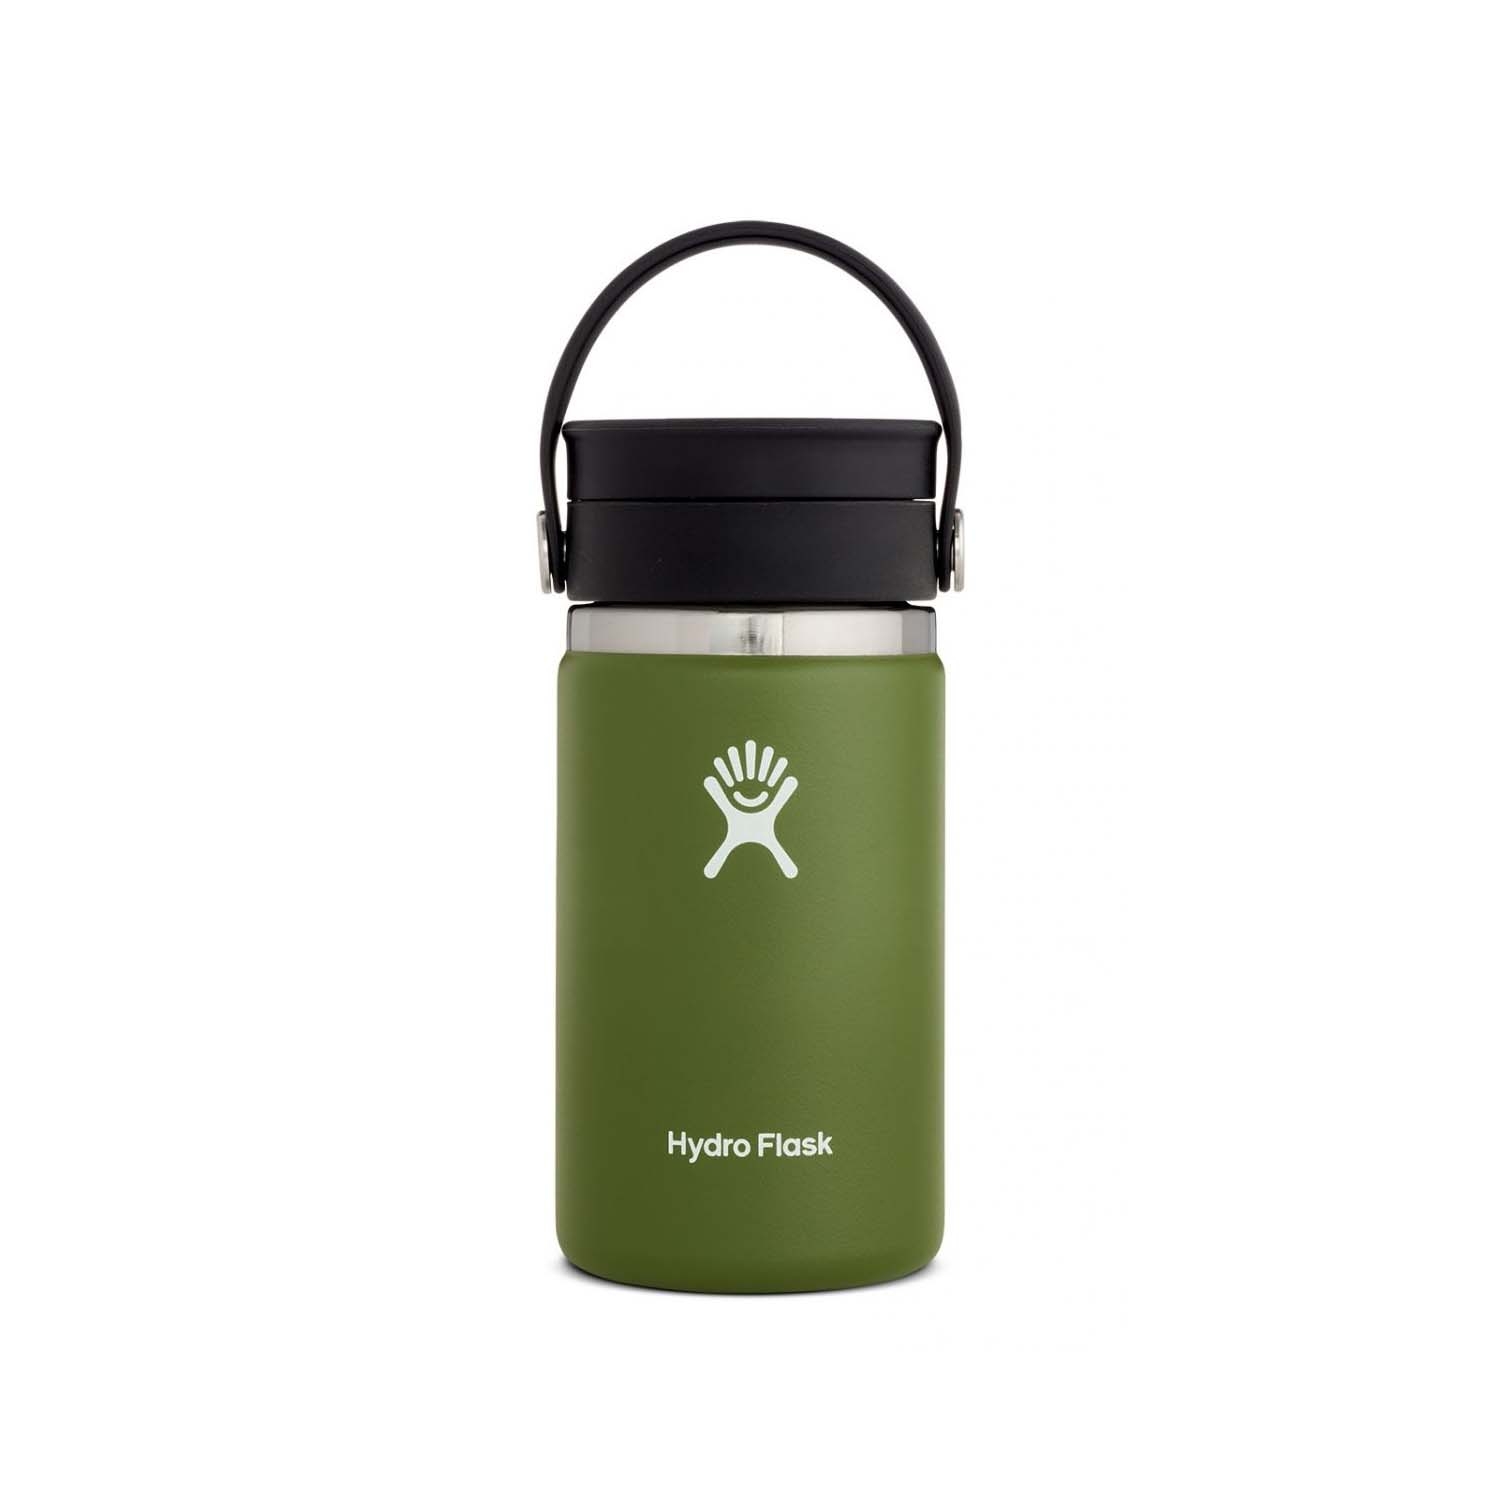 Hydro Flask 12oz Wide Mouth Coffee Flask with Flex Sip Lid Olive